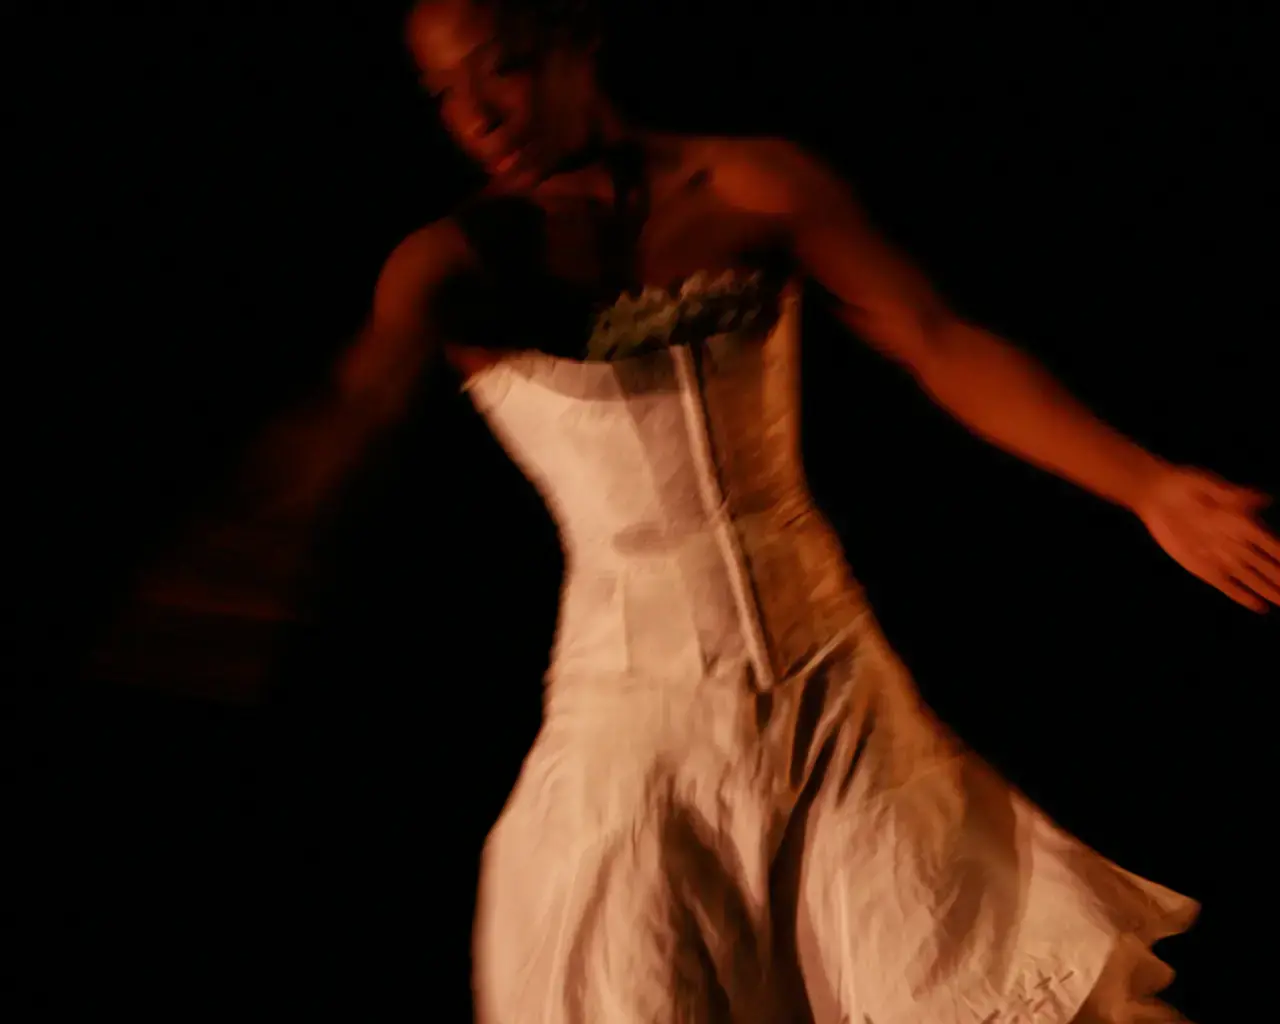 Tania Isaac performing in 2007.